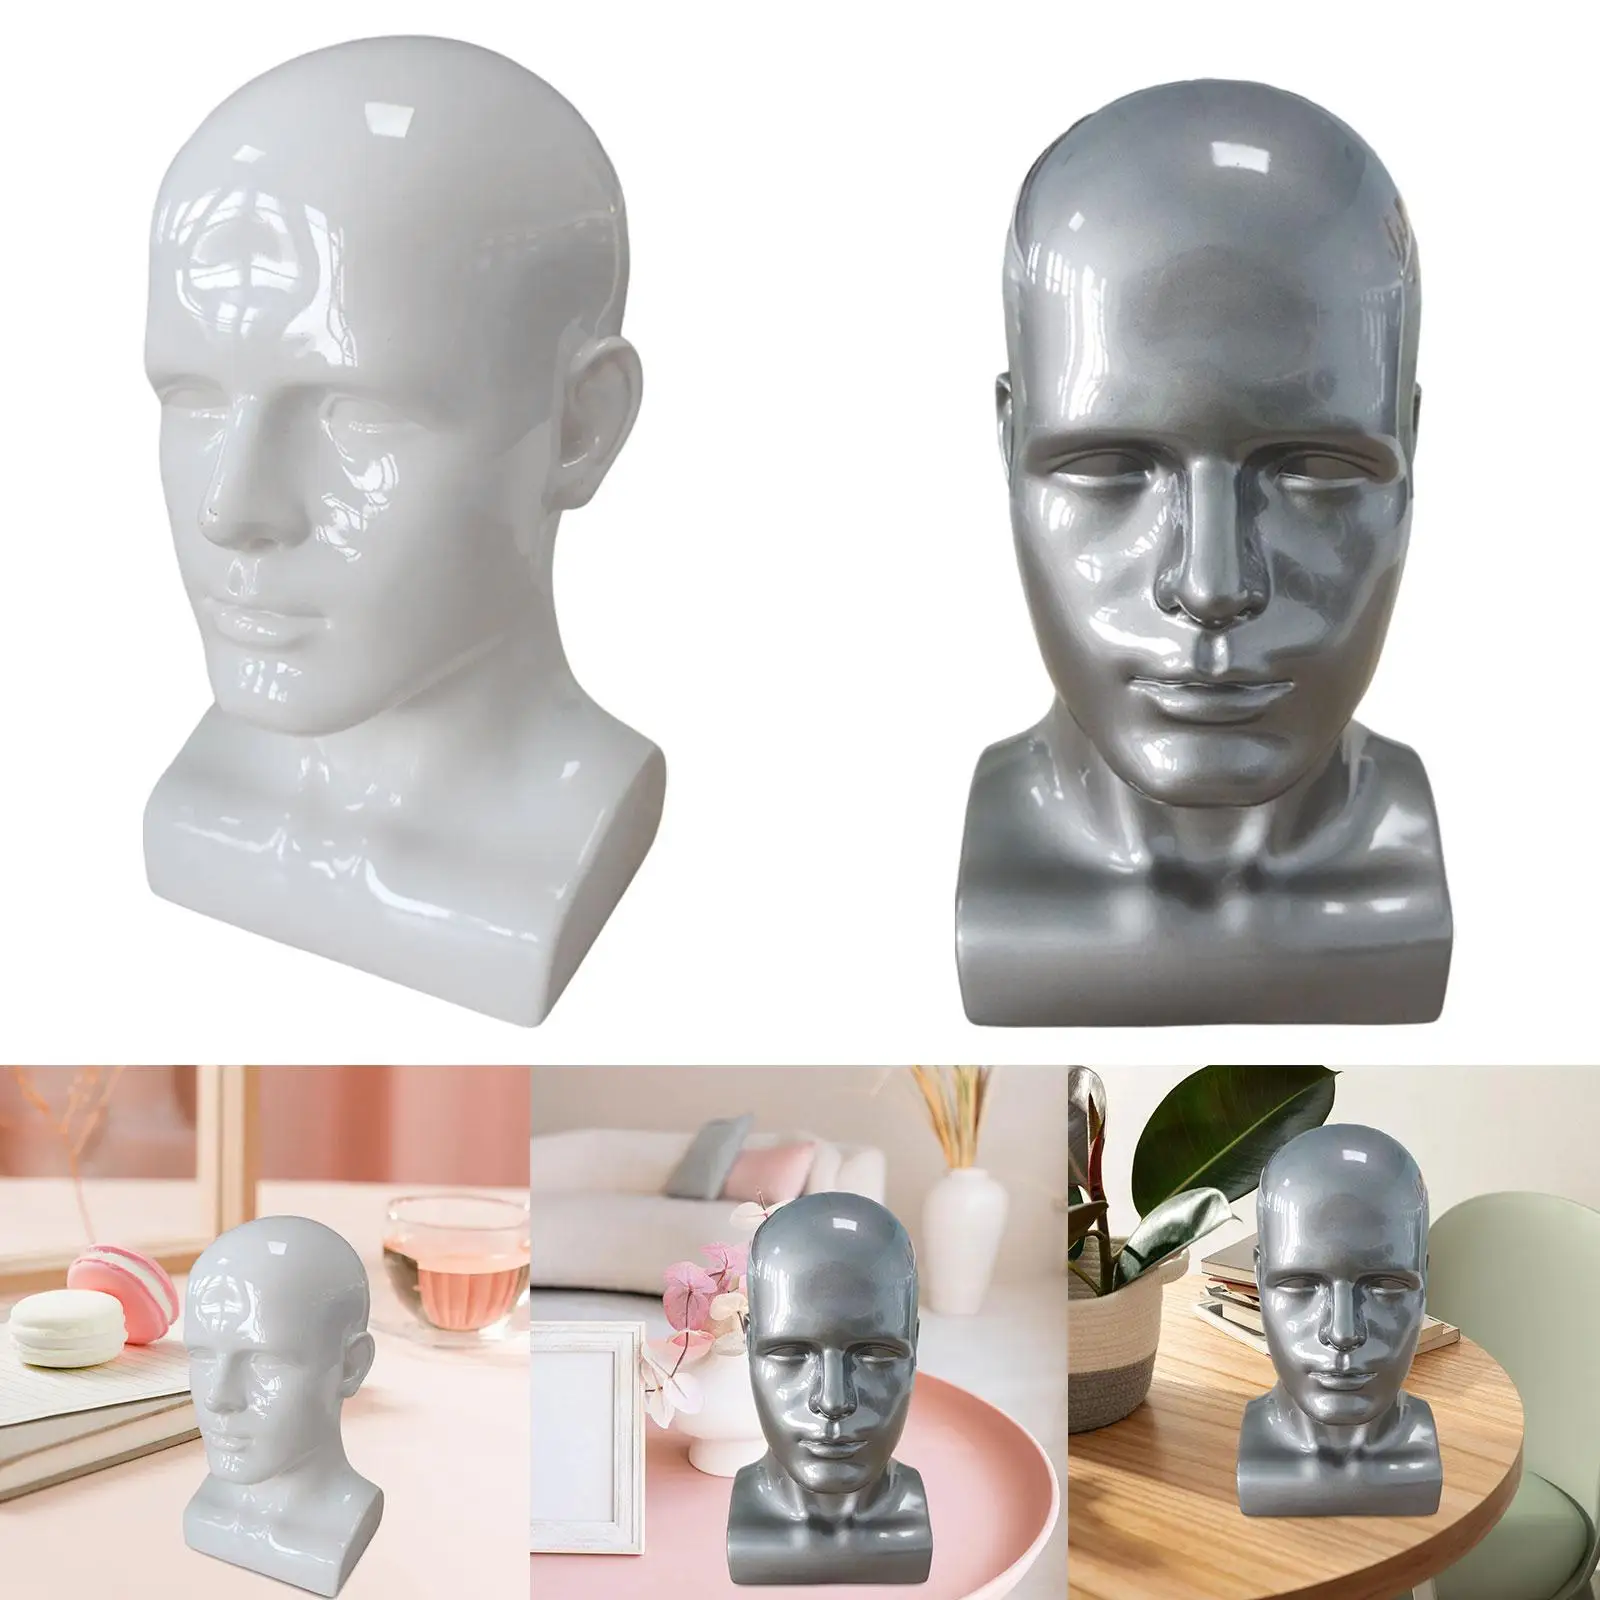 PVC Mannequin Male Head Model Beauty Styling Tool Professional Home Decor for Hair Glasses Lightweight 13.4inch Tall Sturdy